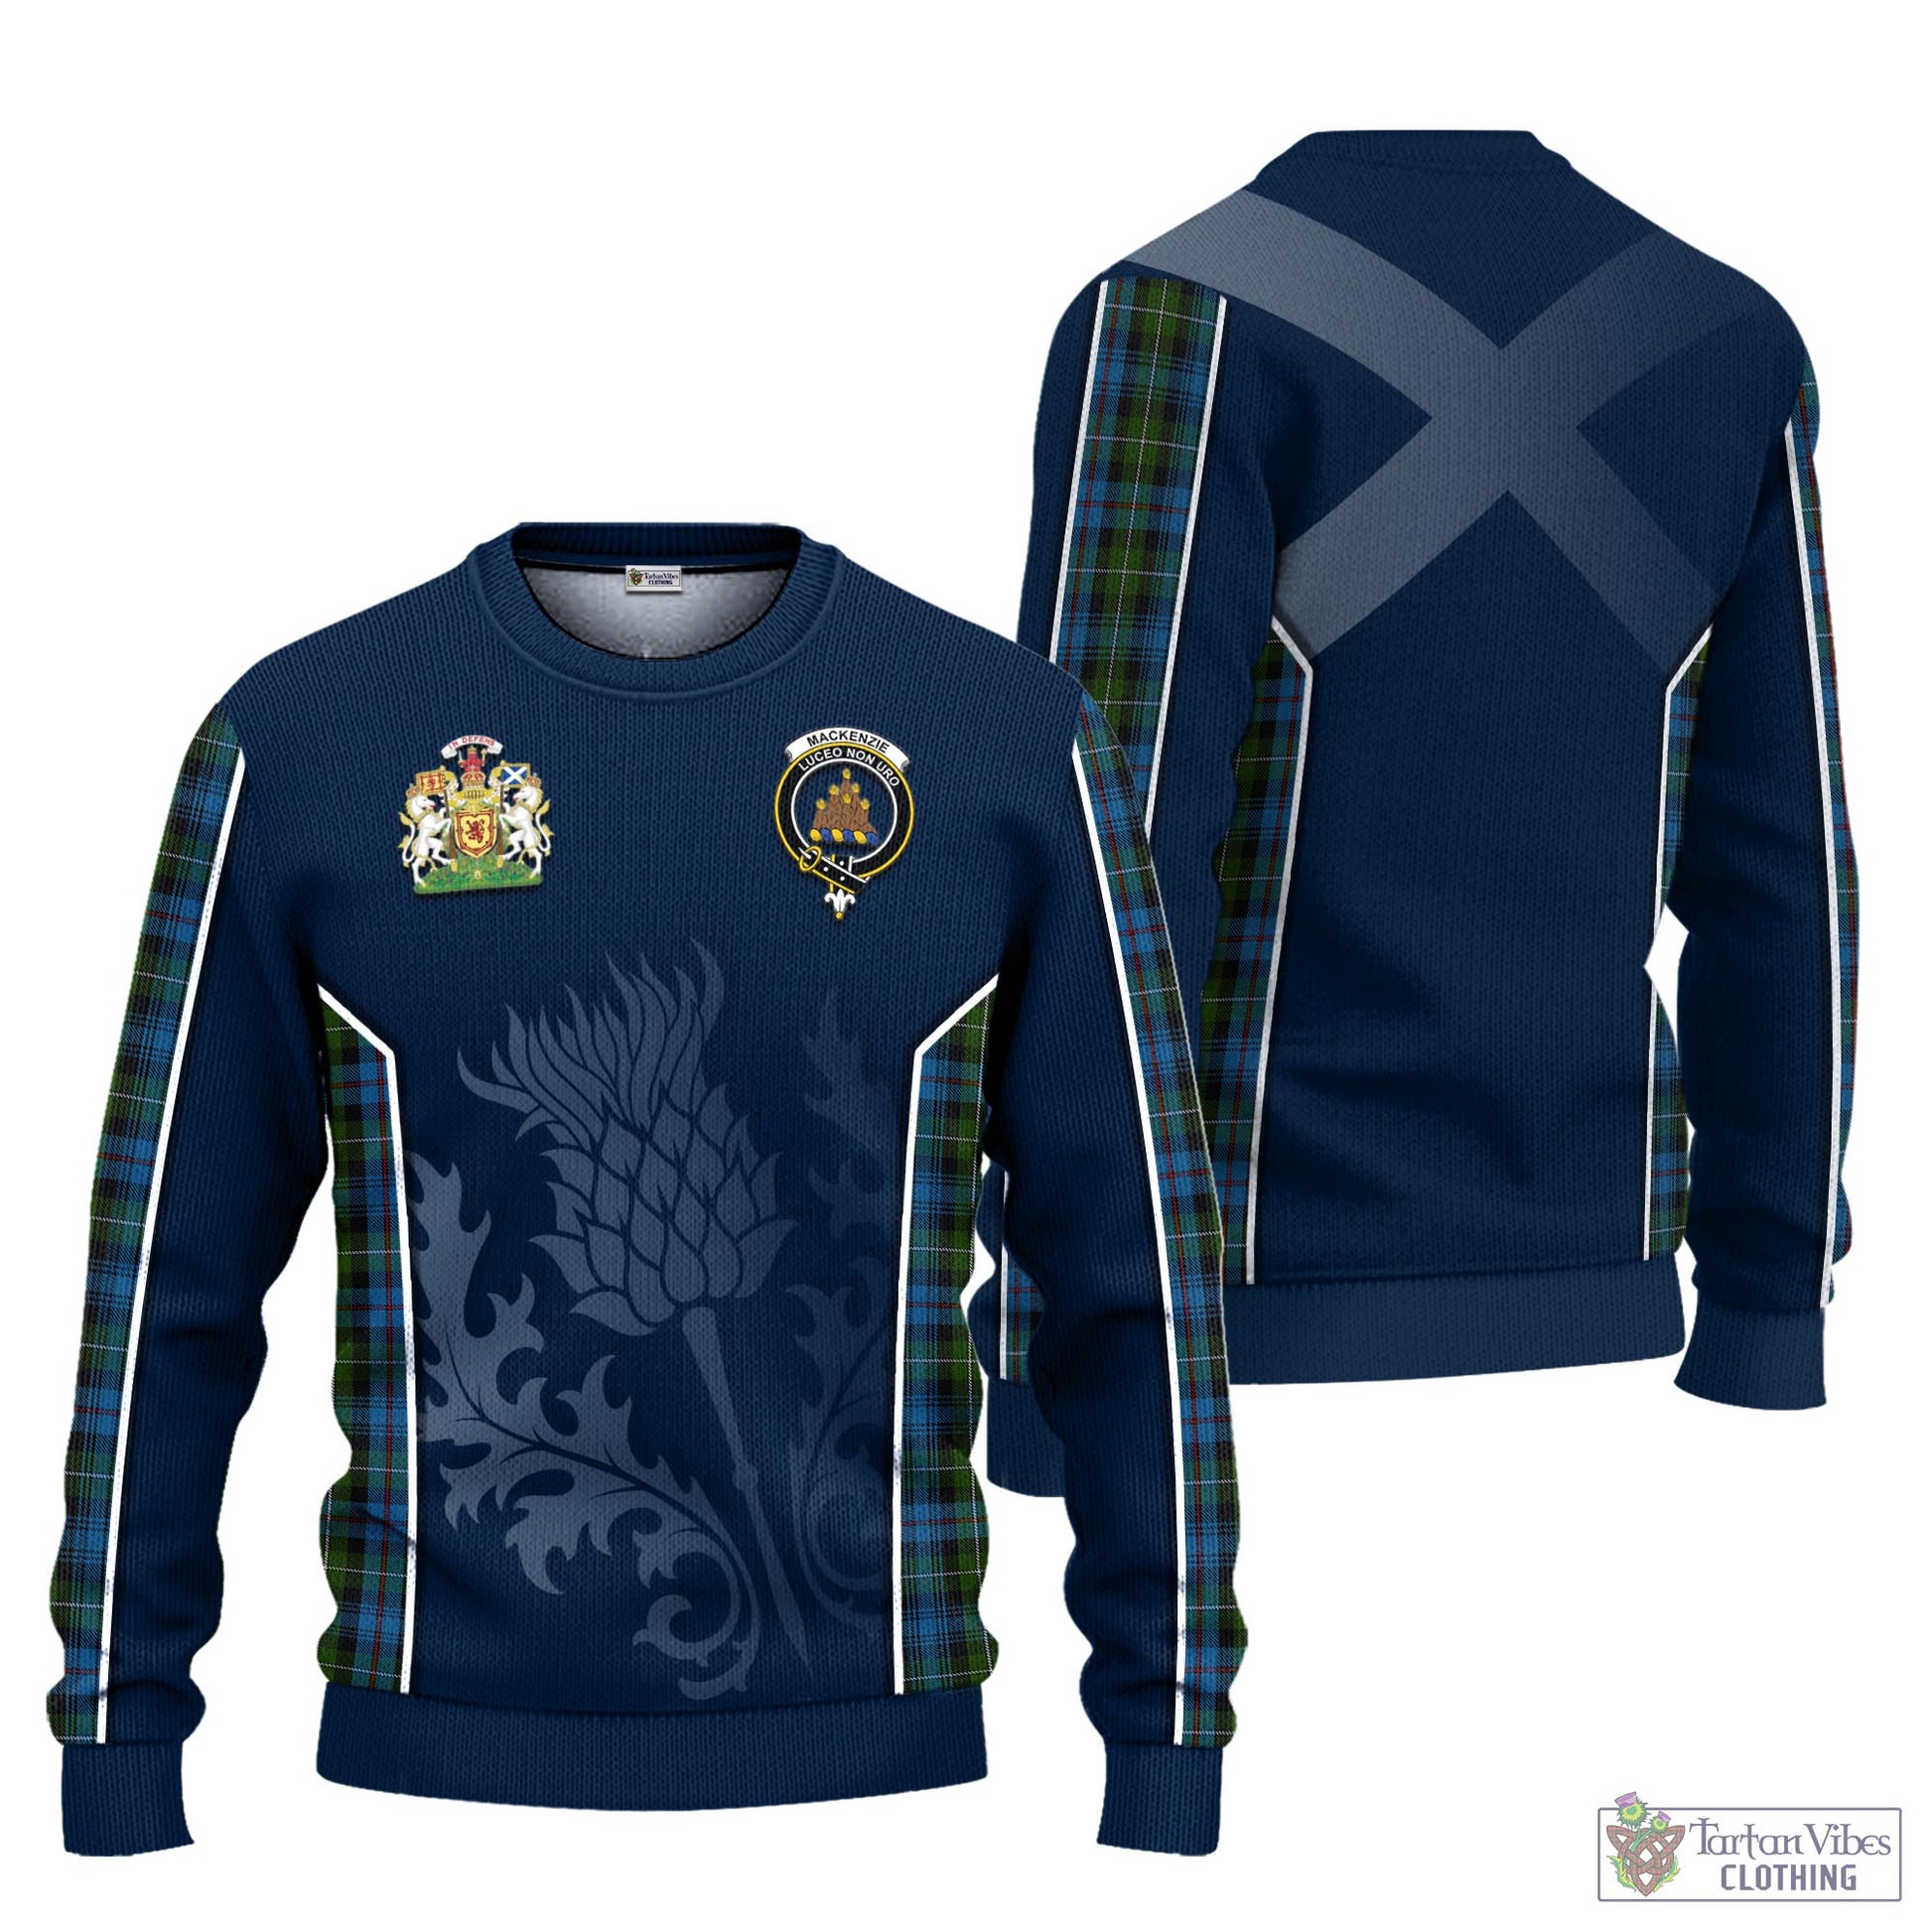 Tartan Vibes Clothing MacKenzie Tartan Knitted Sweatshirt with Family Crest and Scottish Thistle Vibes Sport Style